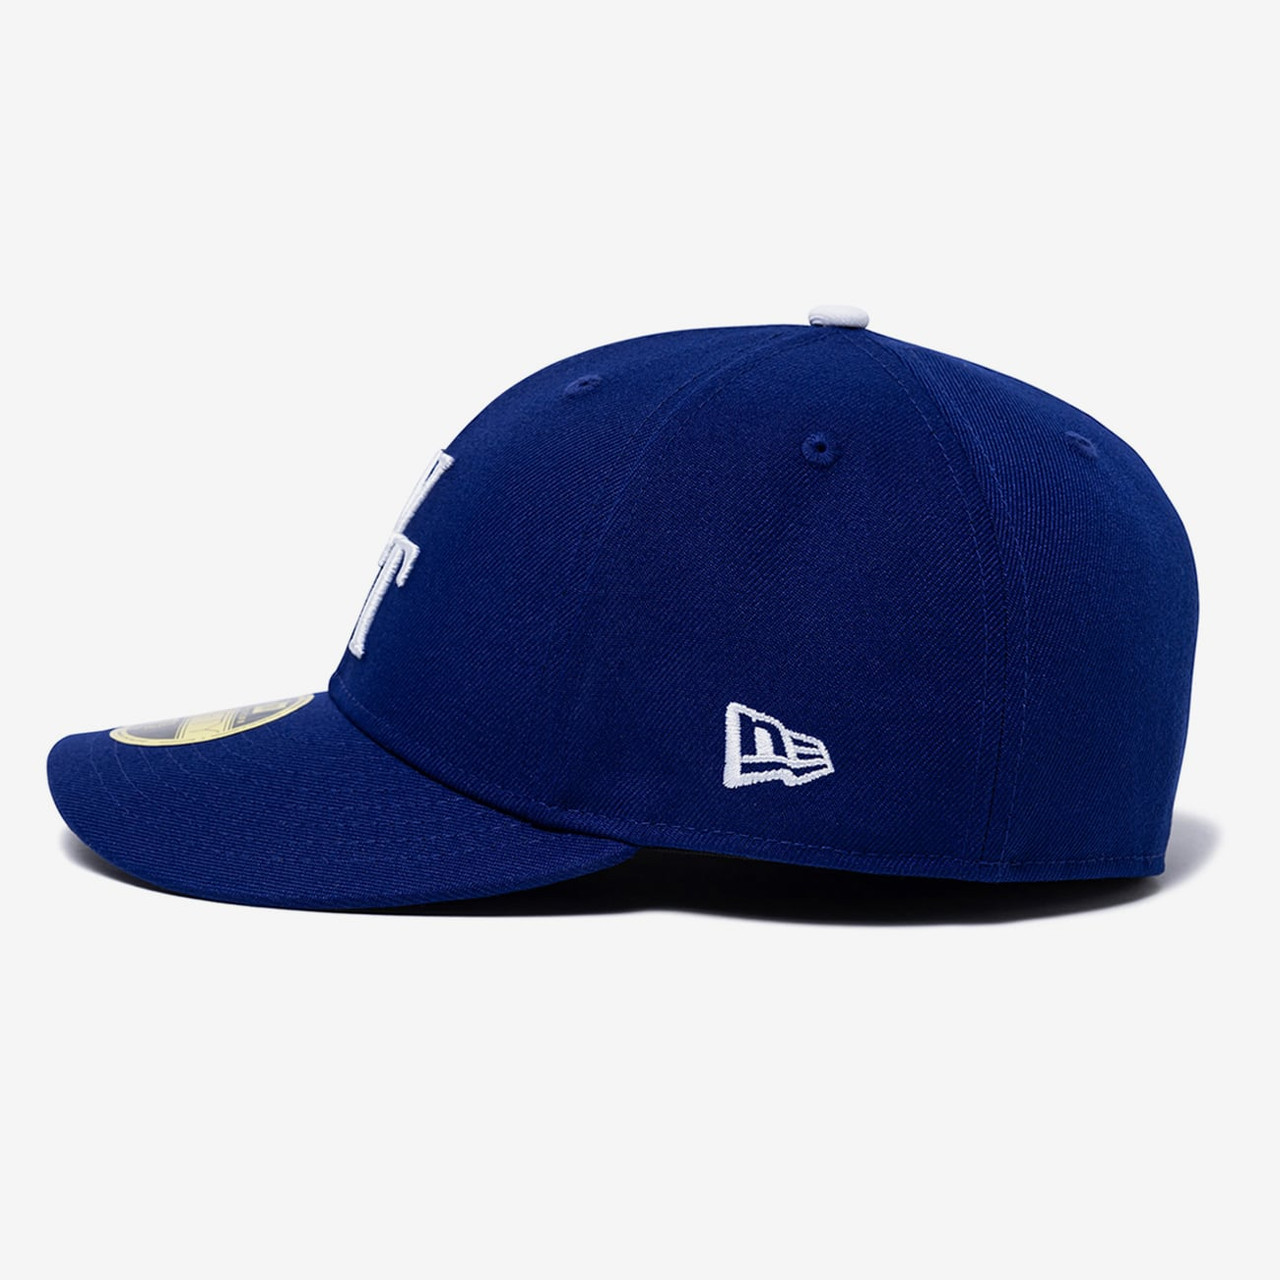 59FIFTY LOW PROFILE / CAP / POLY. TWILL. NEWERA®. LEAGUE 1472